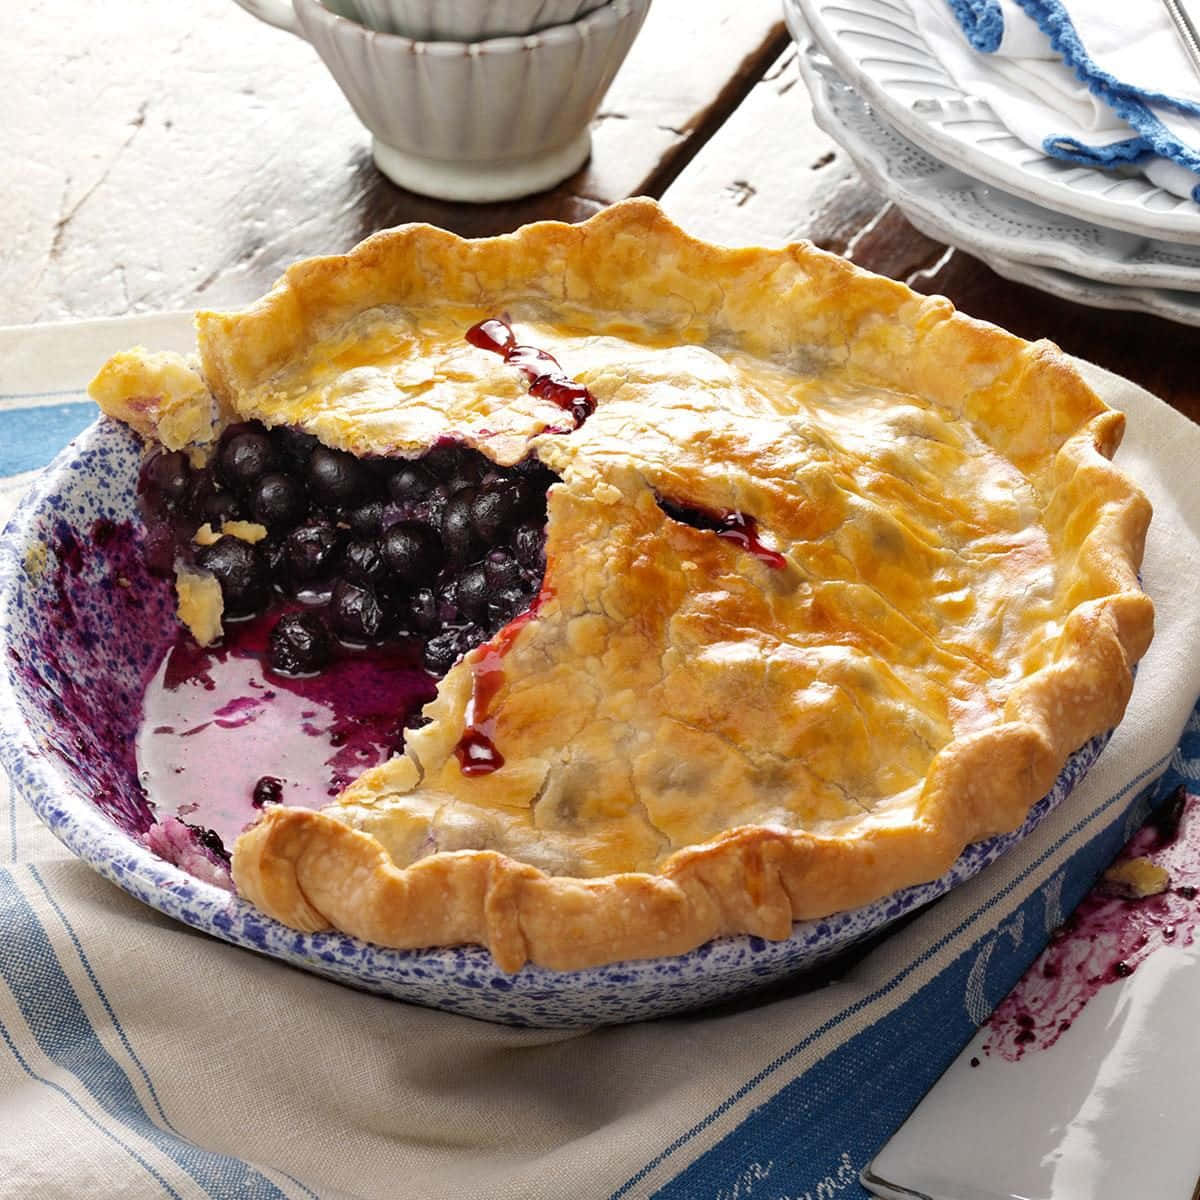 "A Warm, Sweet Slice of Delicious Blueberry Pie" Wallpaper